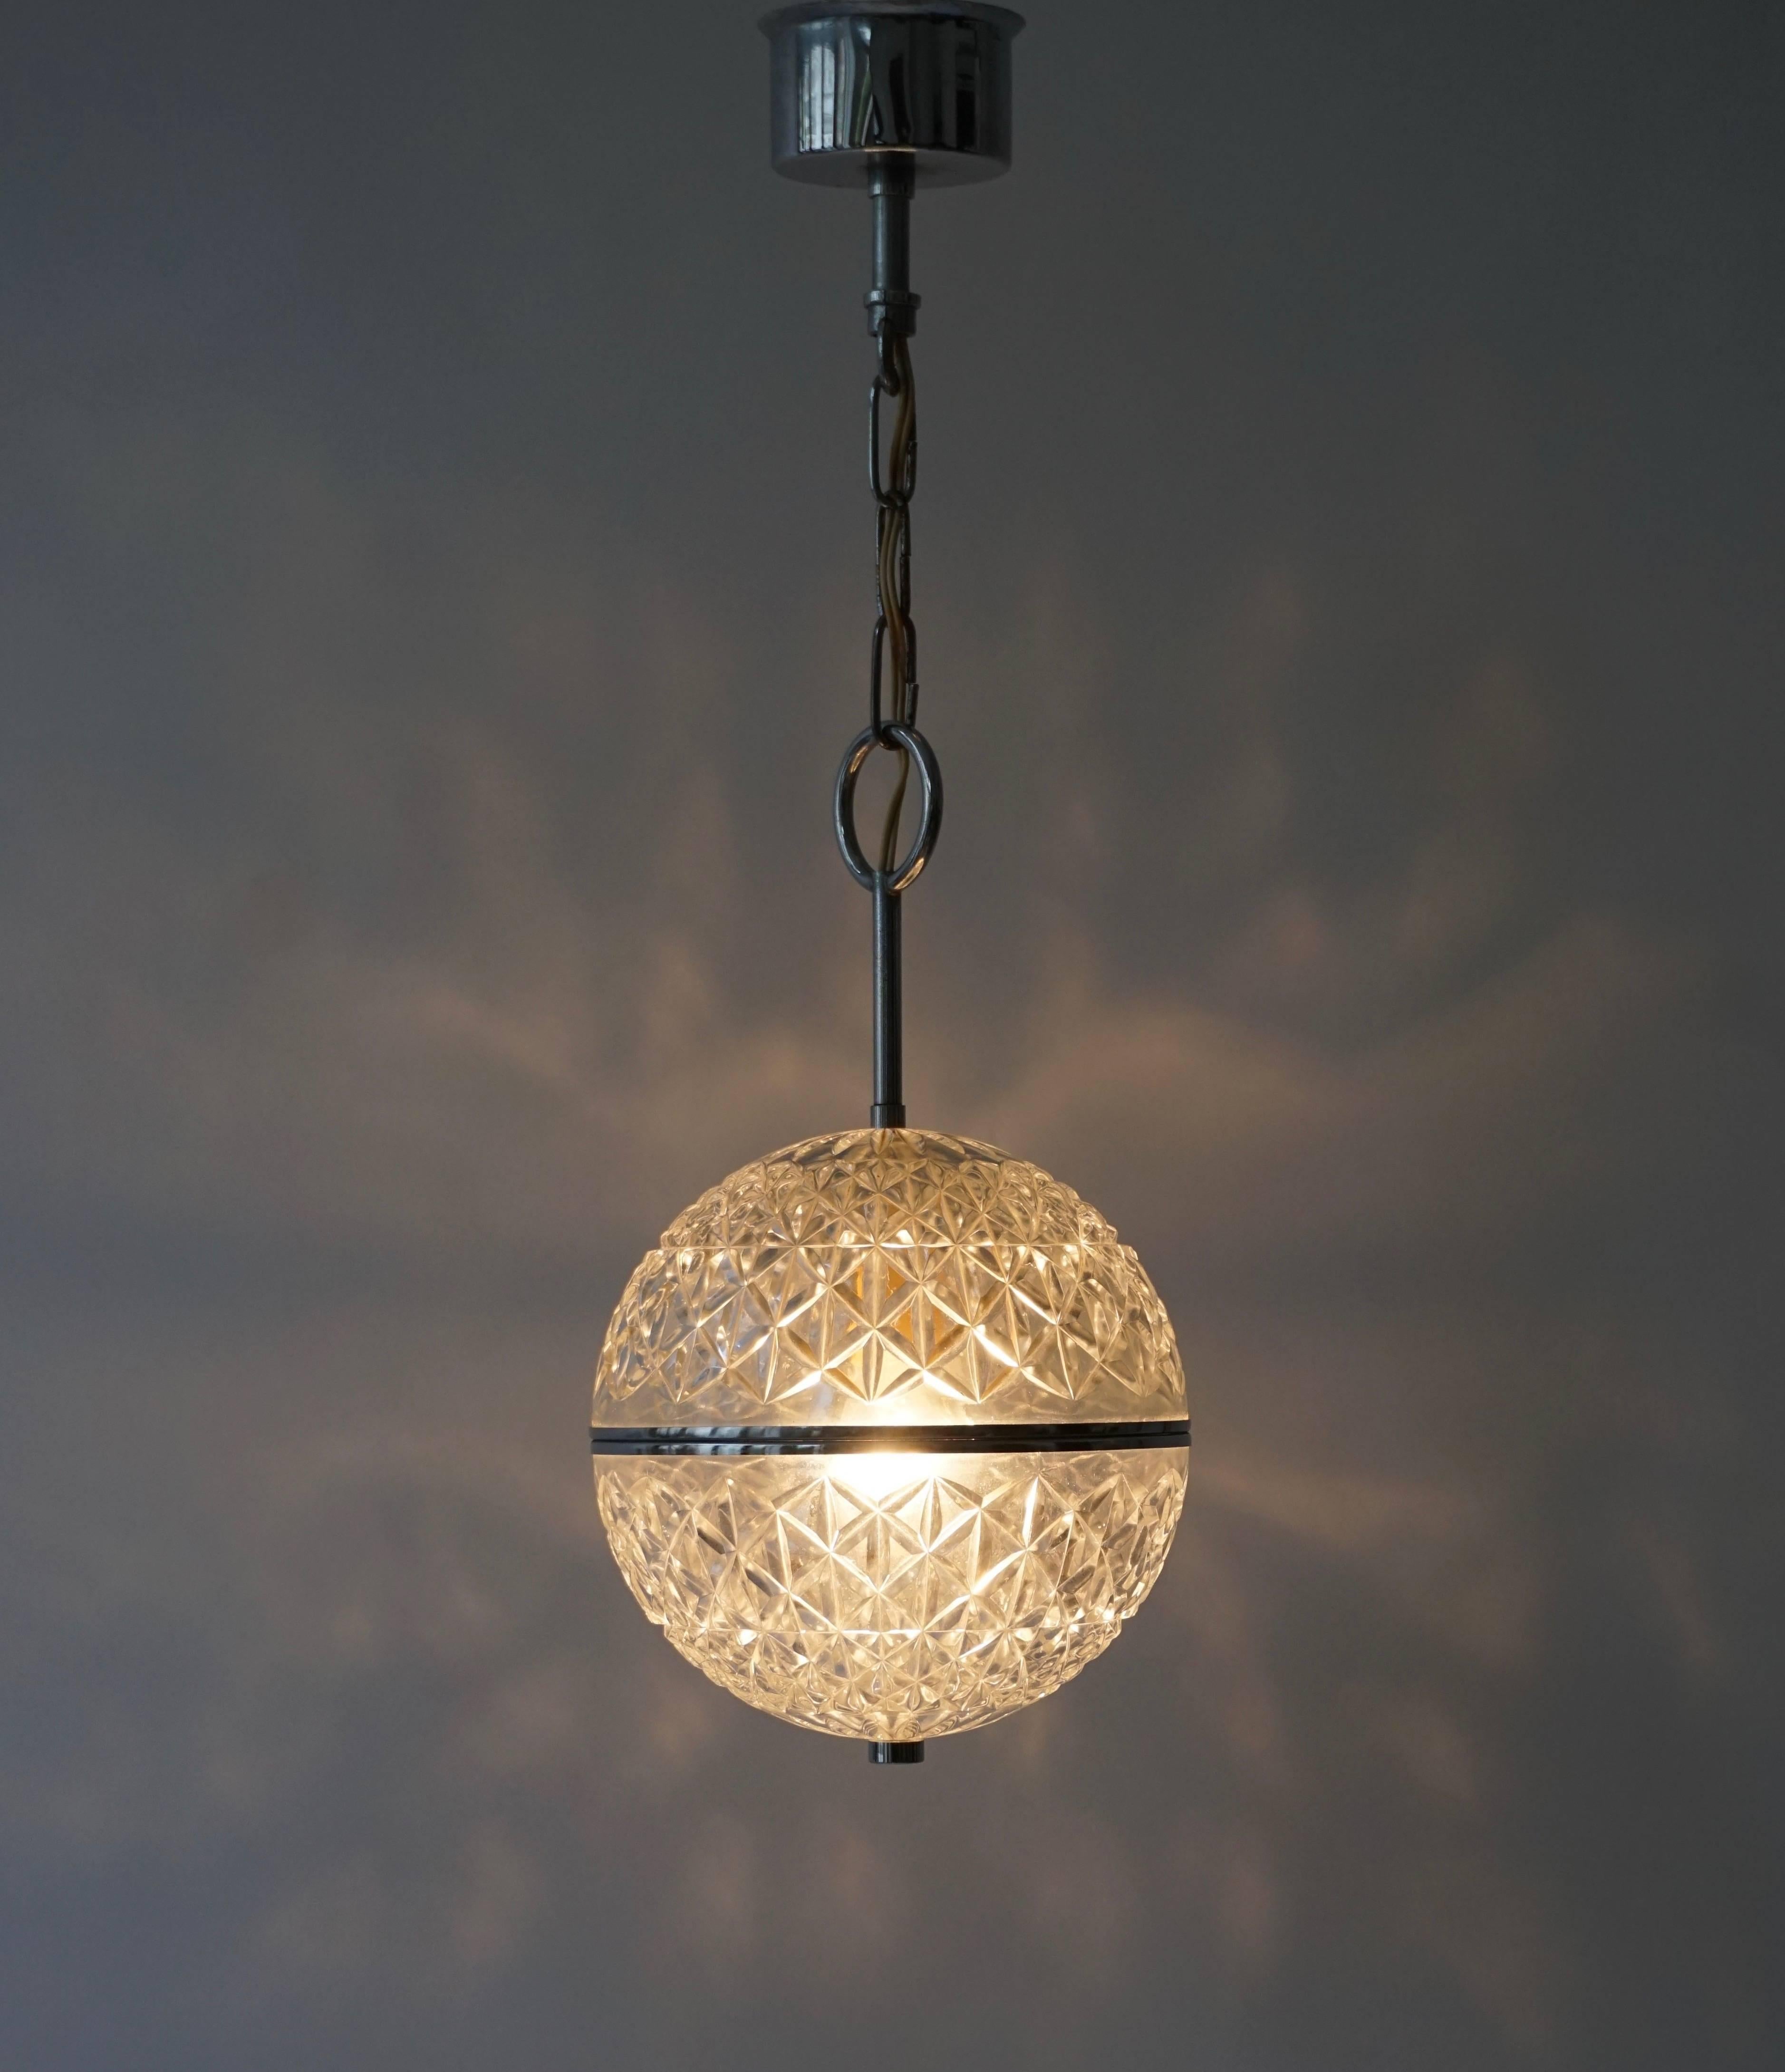 This Italian Murano crystal glass globe pendant light gives an amazing effect in the dark.
The globe has a chrome hardware.
Measures: 
Diameter 20 cm.
Height 58 cm.